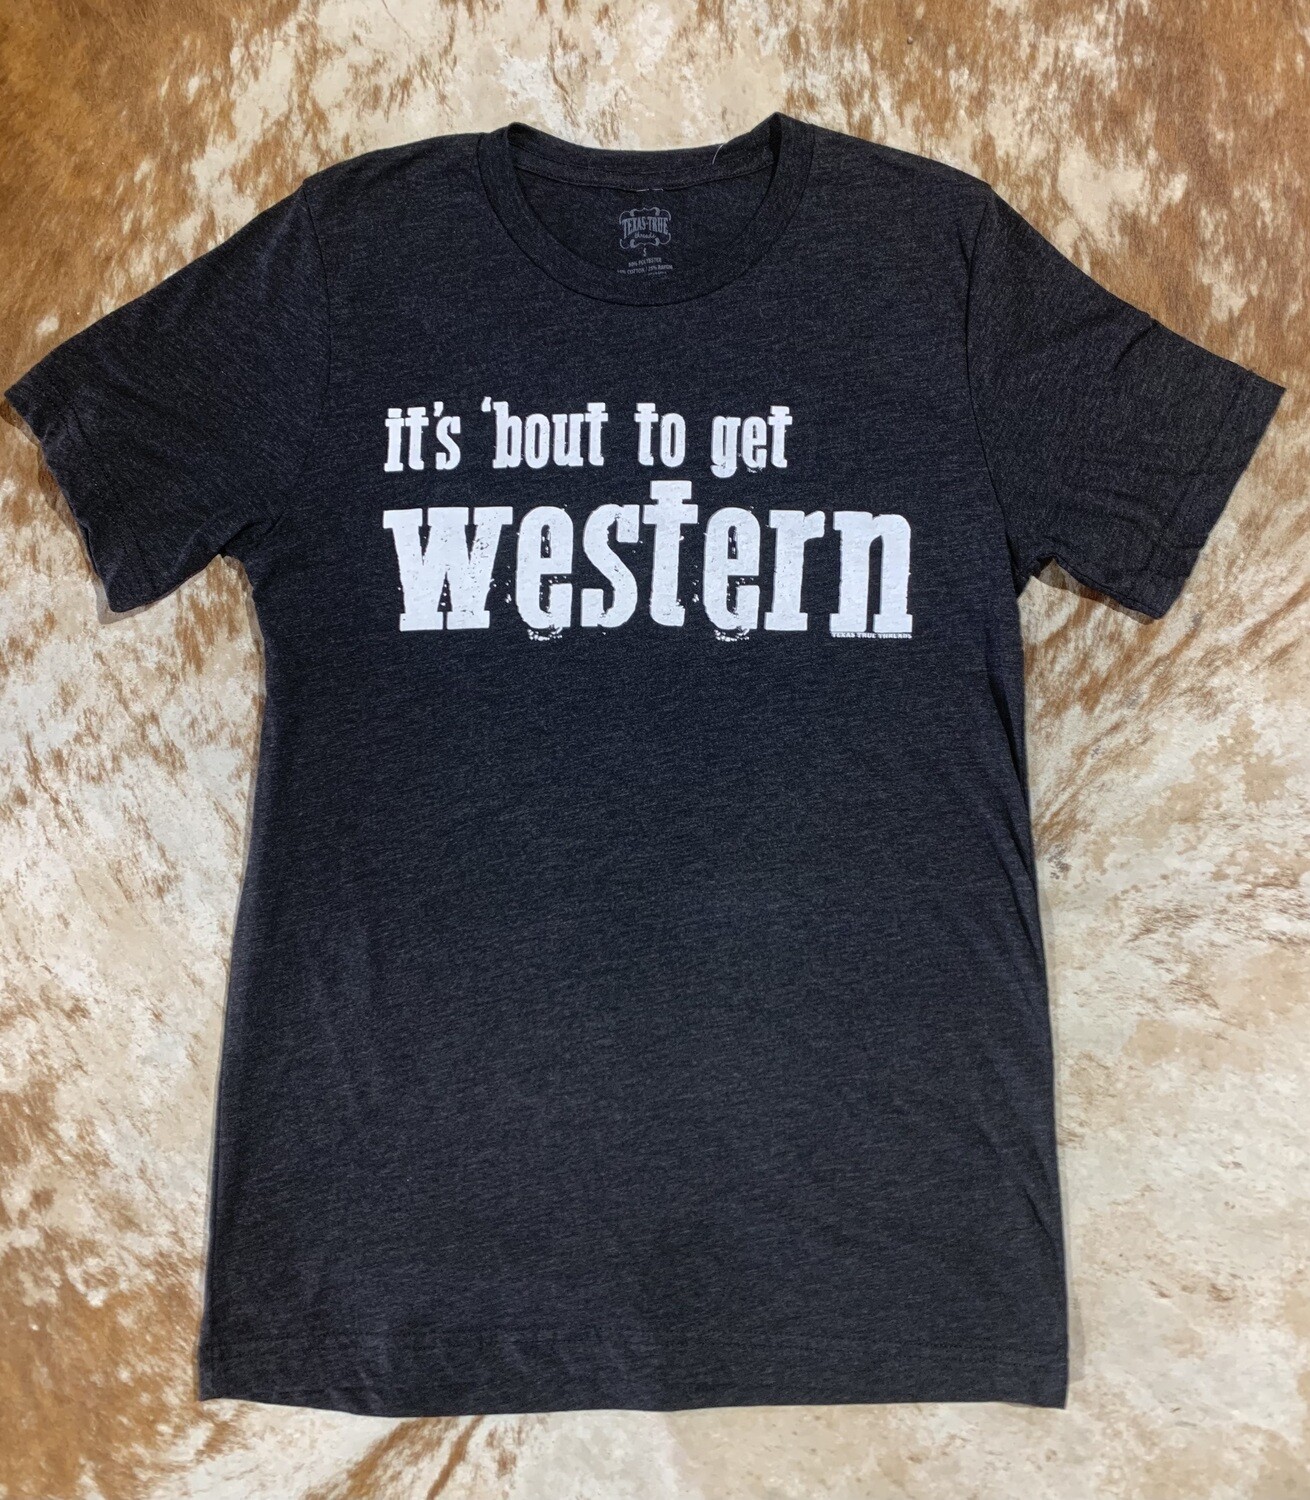 BOUT TO GET WESTERN Tee